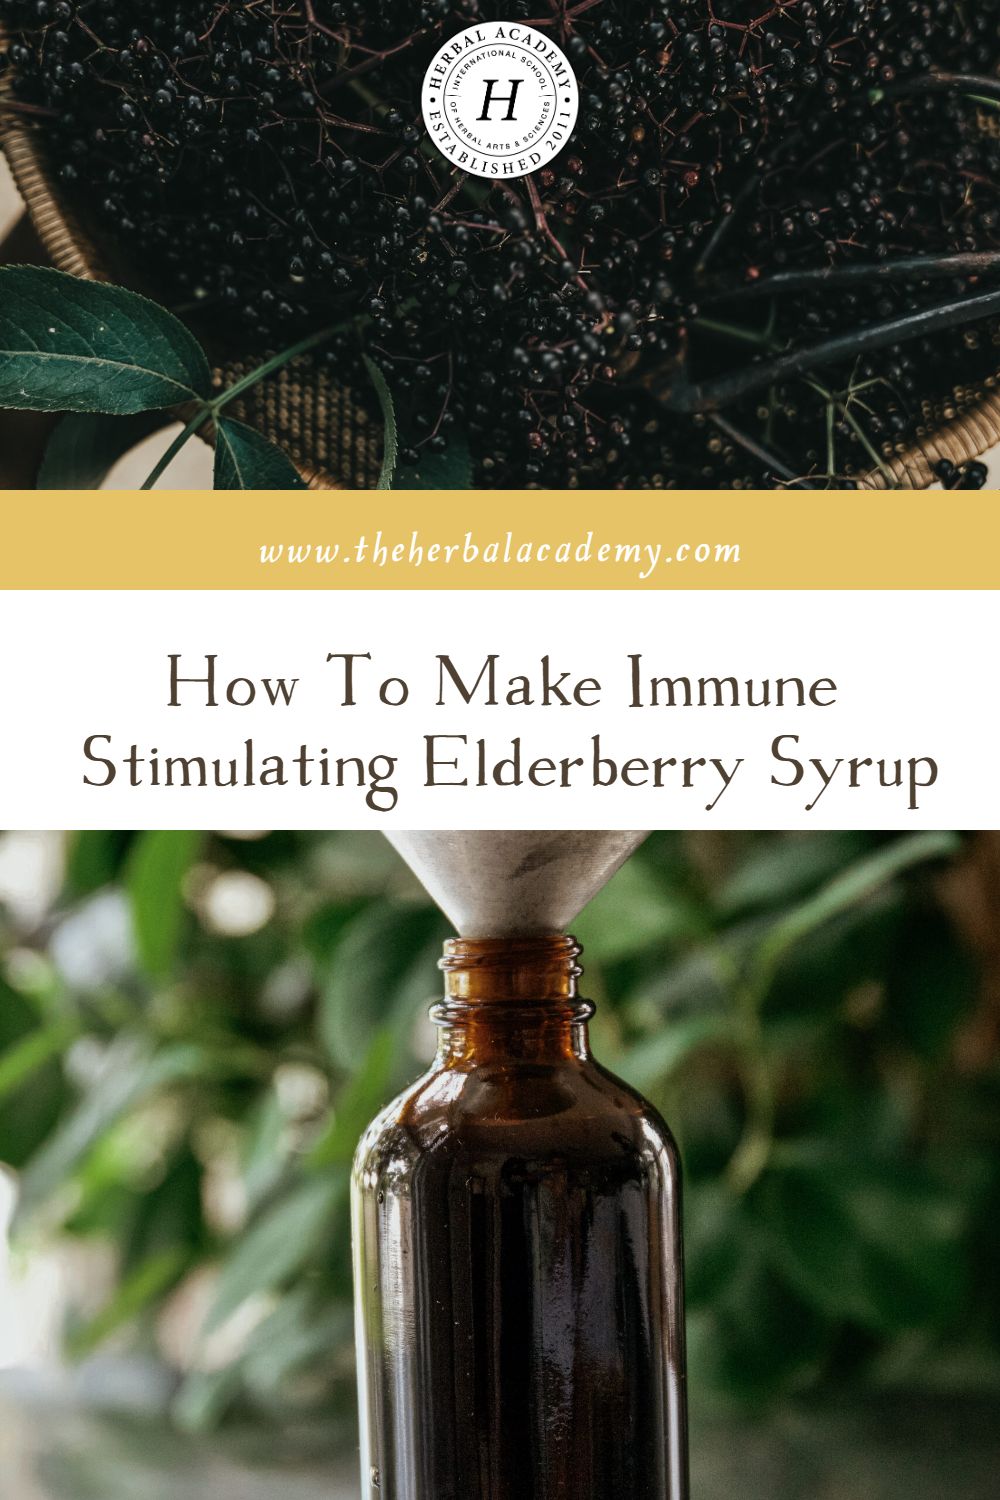 How To Make Immune Stimulating Elderberry Syrup | Herbal Academy | We are being invaded by the cold and flu! This Immune Stimulating Elderberry Syrup is just the remedy you need. Take it at the first sign!